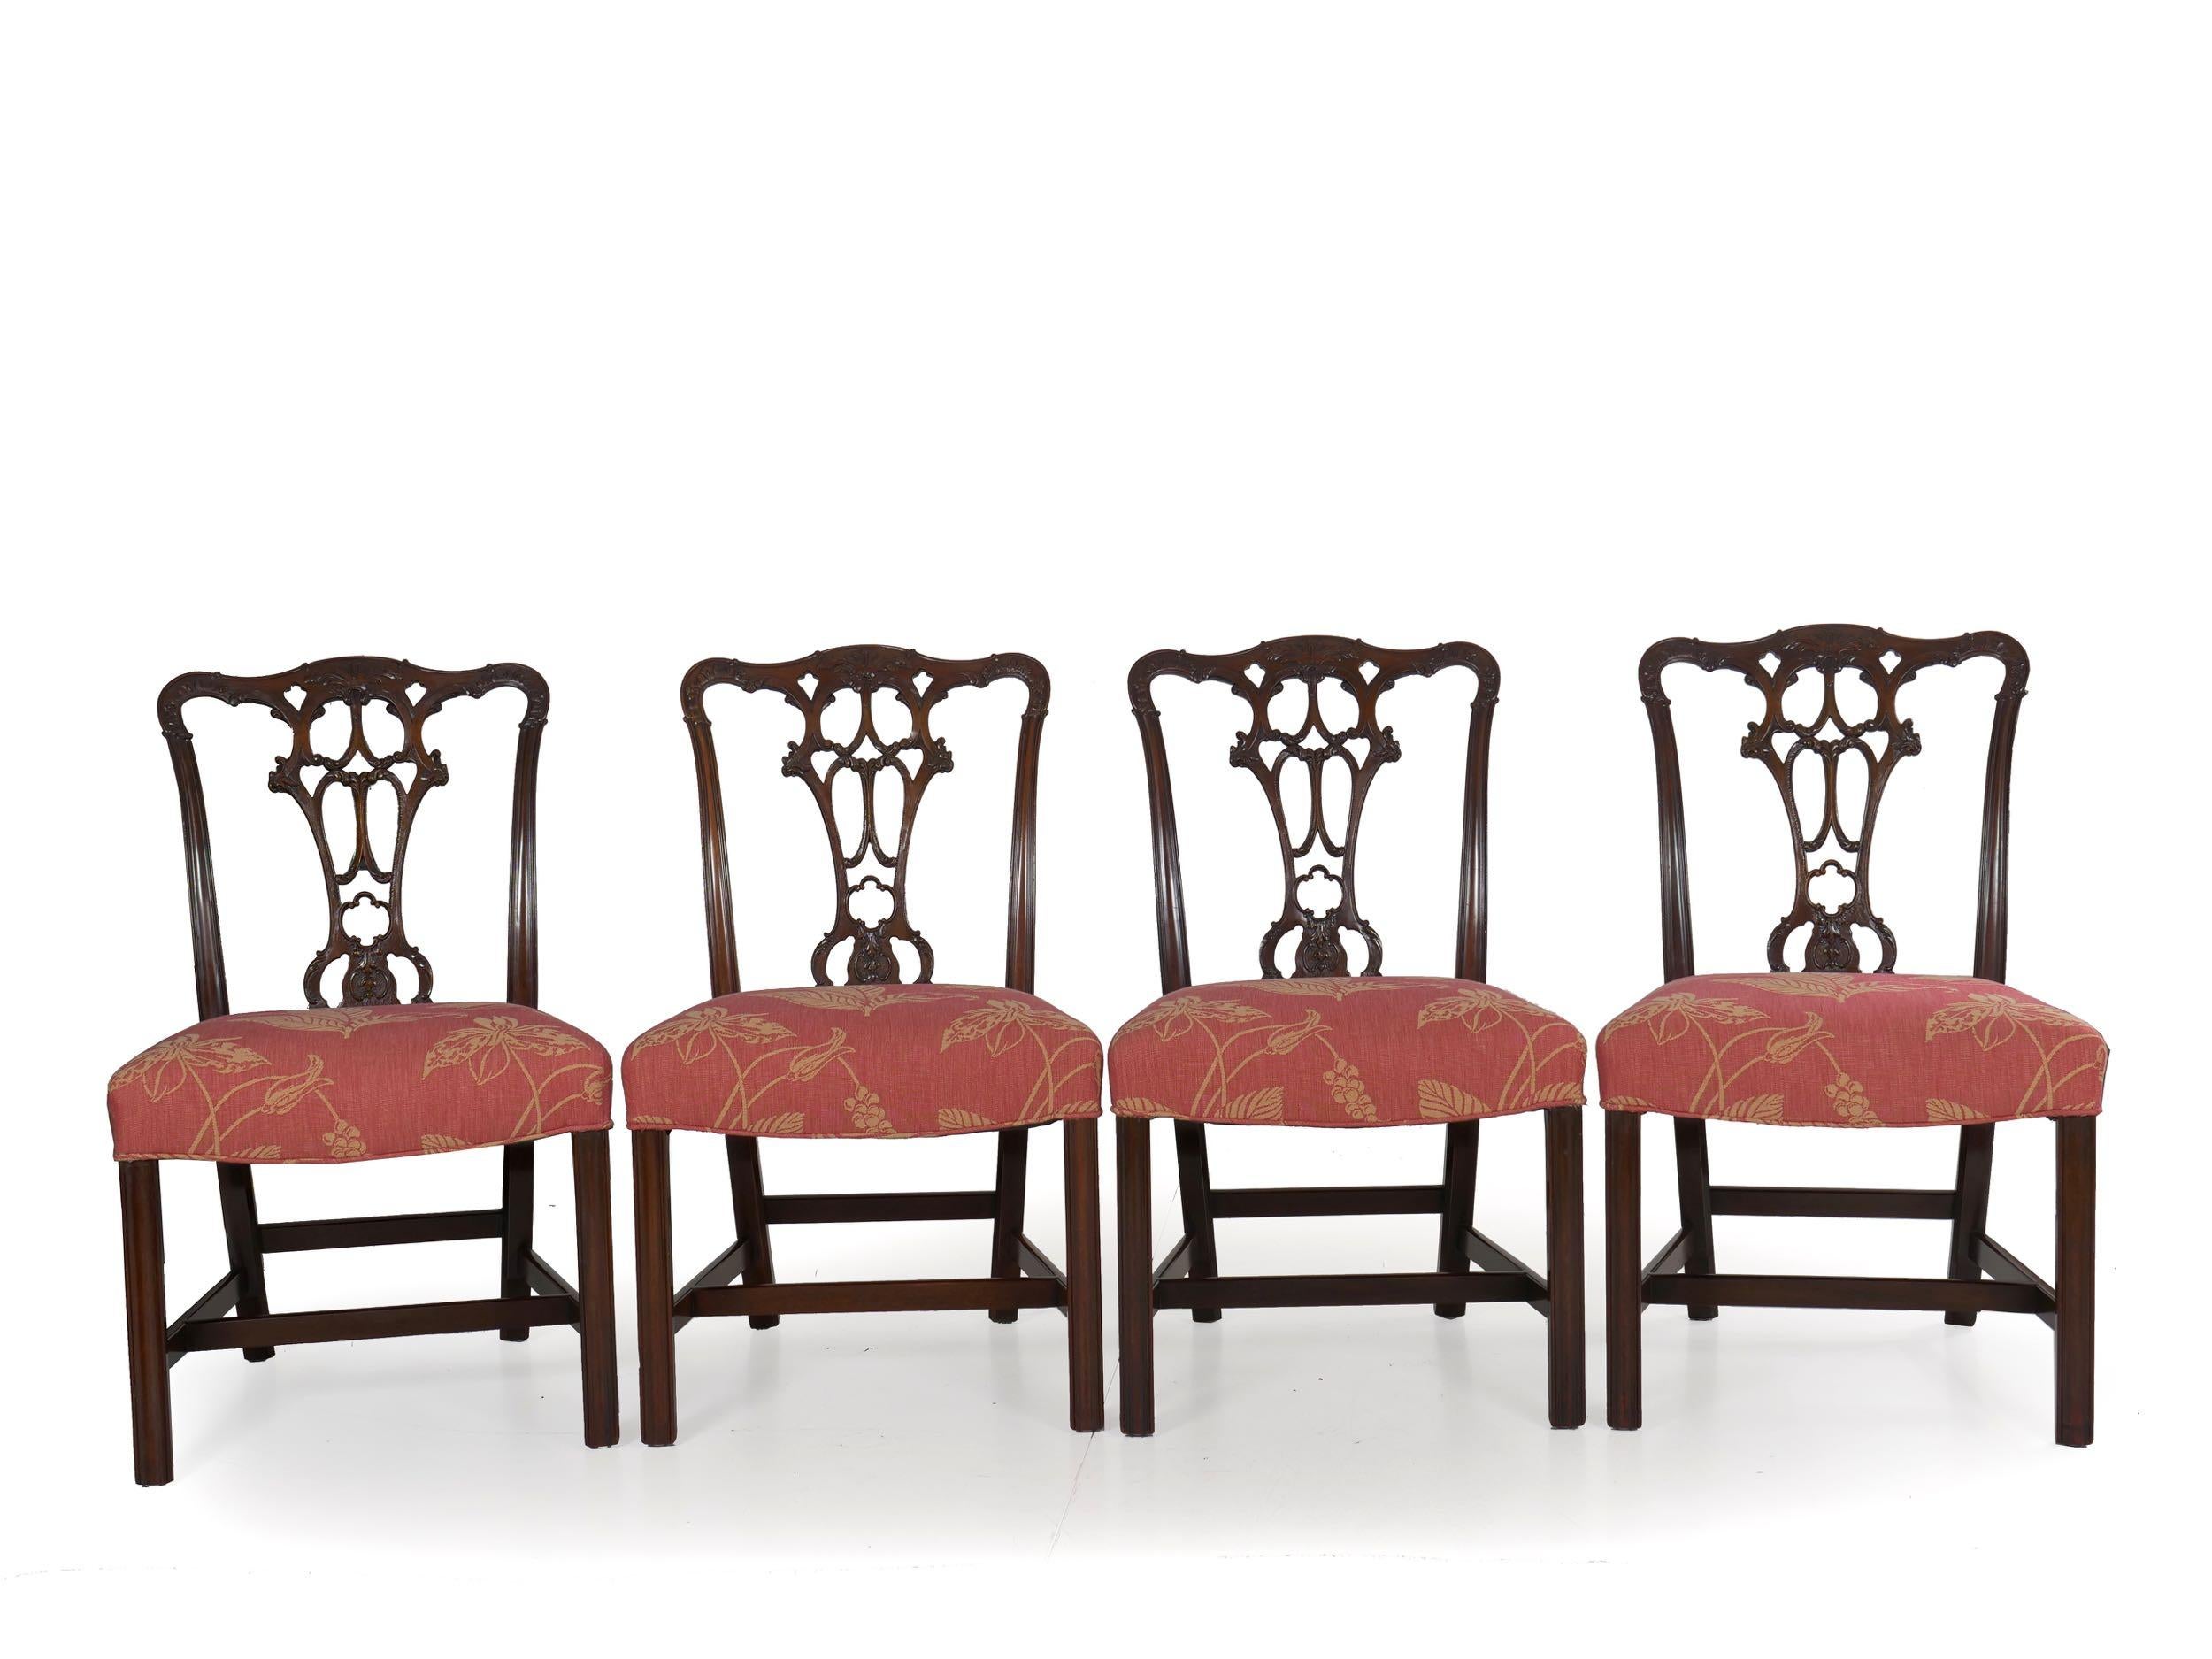 20th Century English Antique Carved Mahogany Dining Chairs, Set of 6